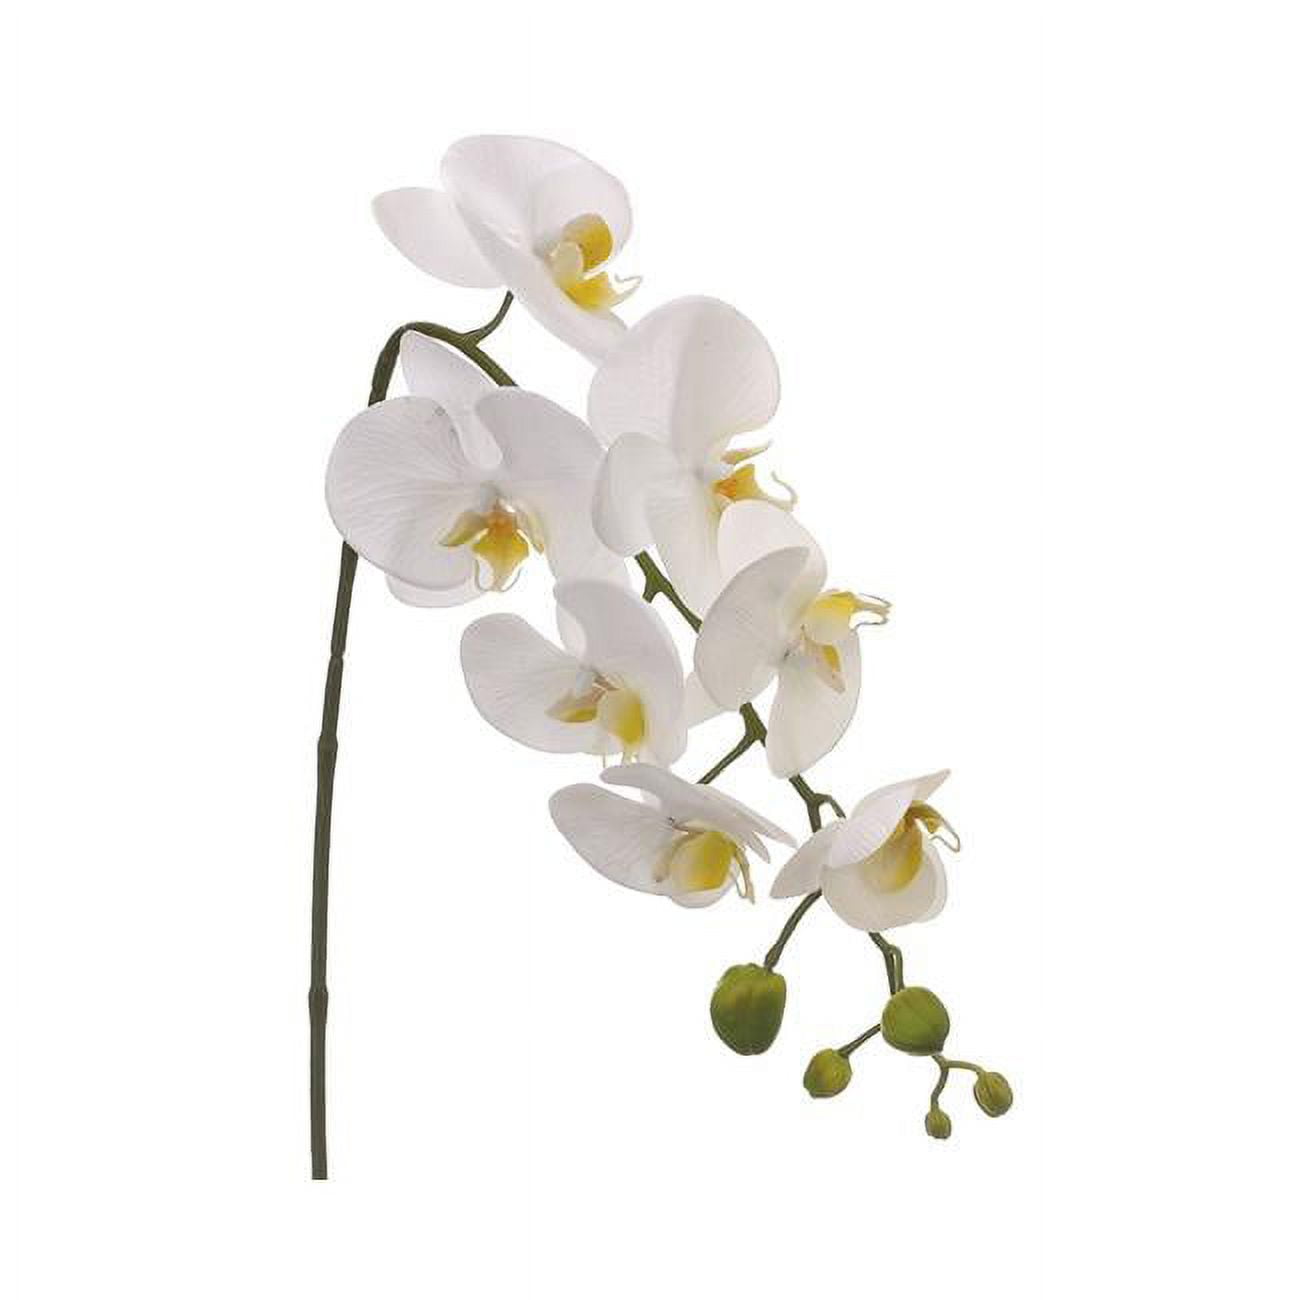 Picture of Allstate Floral & Craft FSO723-WH 28.5 in. Phalaenopsis Orchid Flower Spray - White